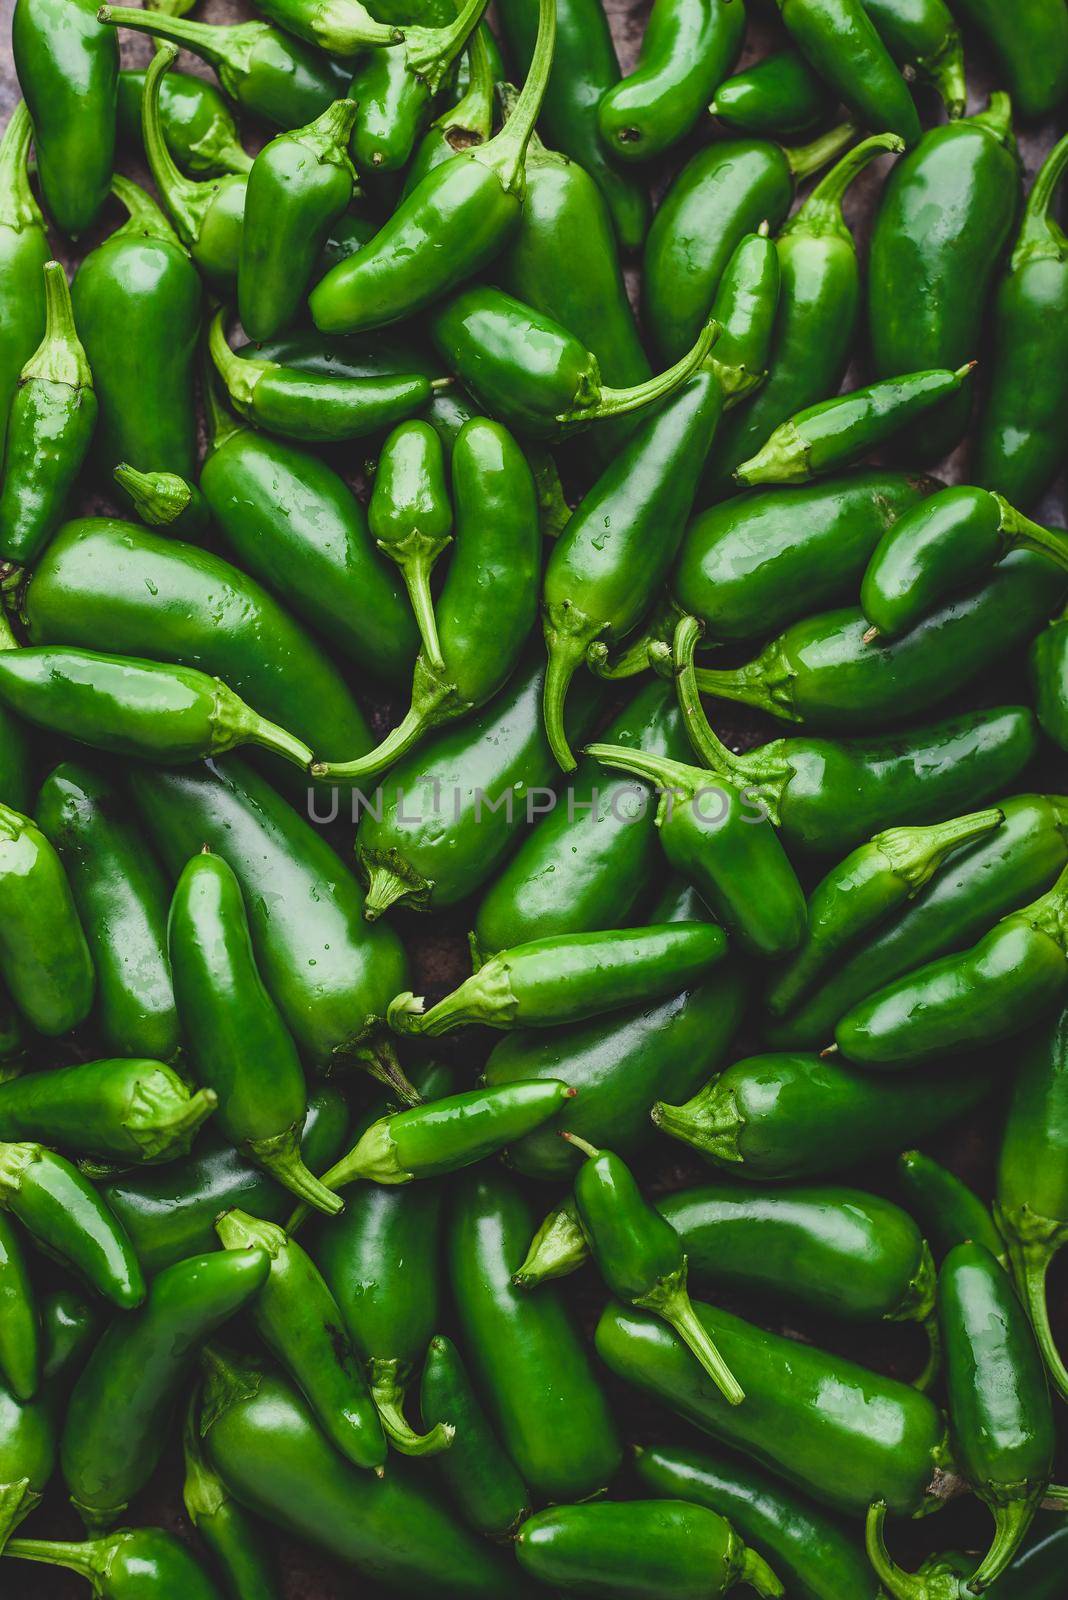 Top View of Green Jalapeno Peppers